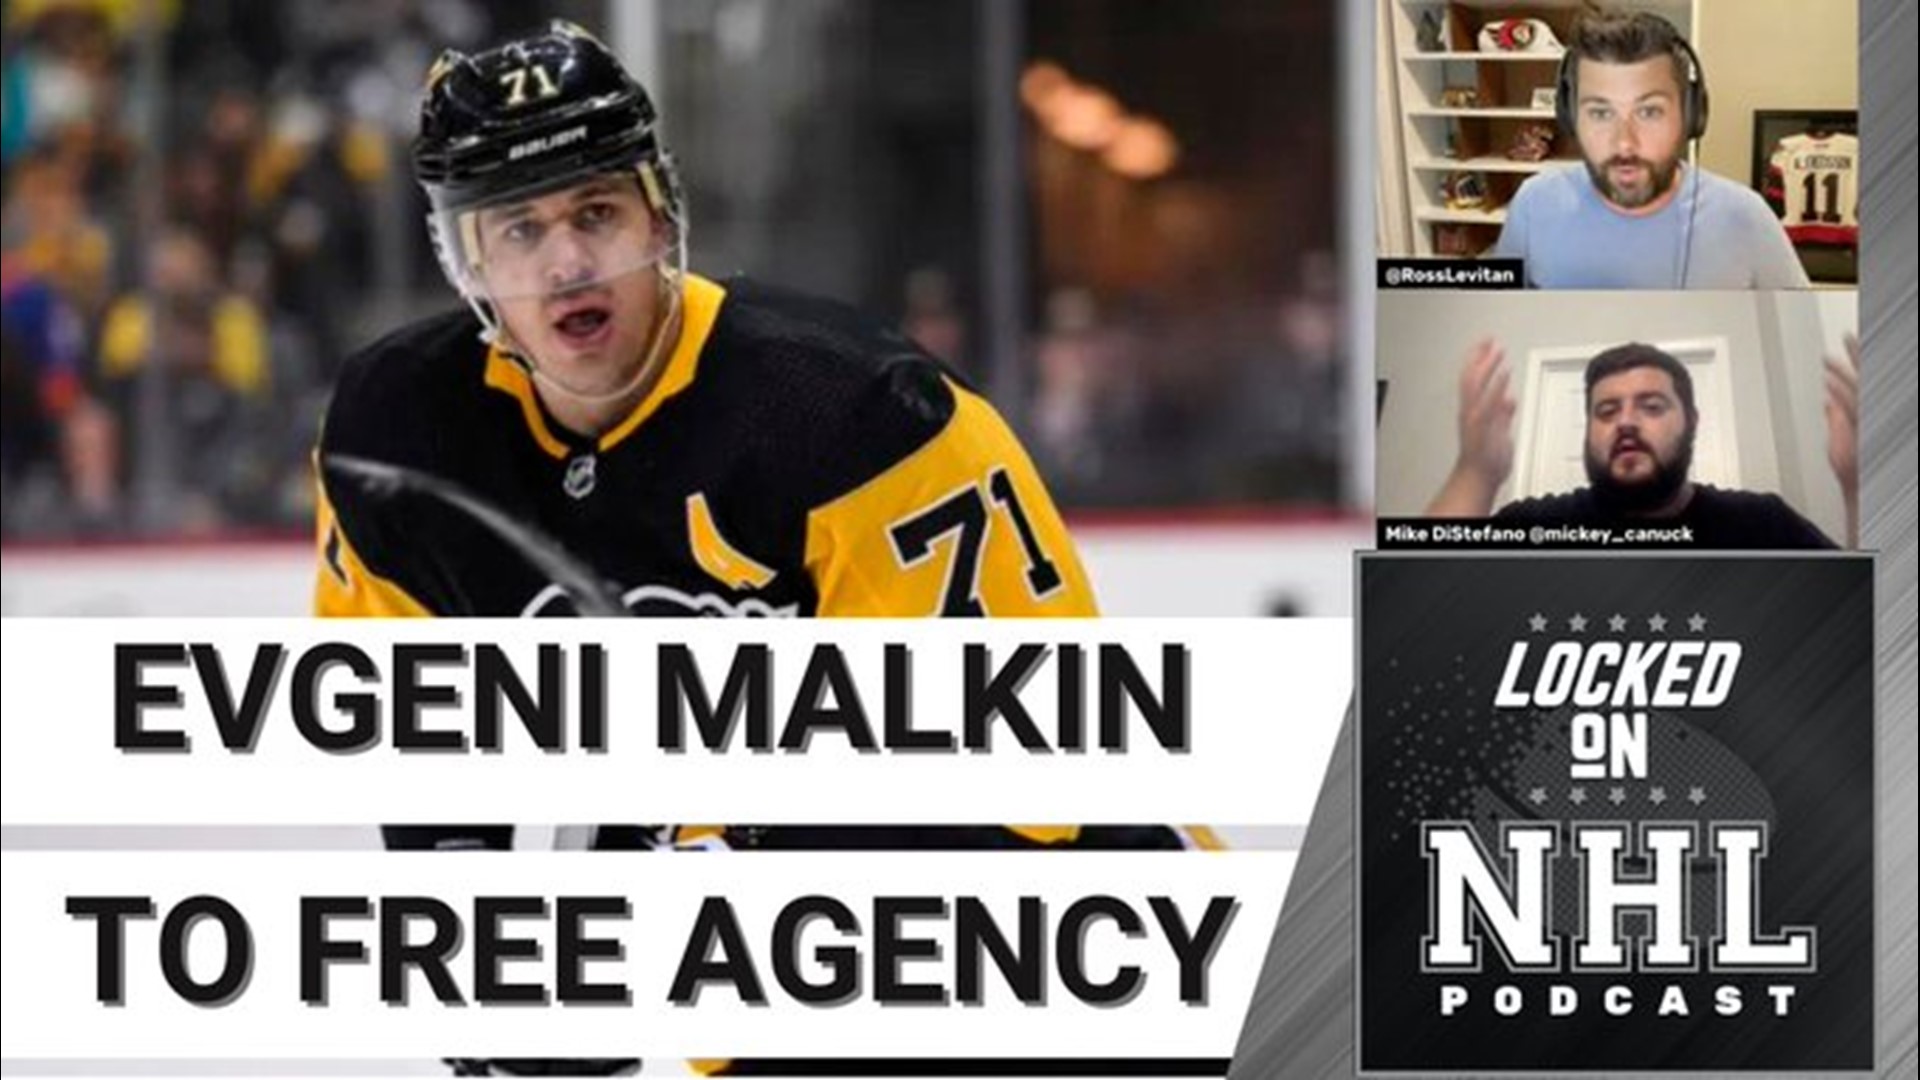 Locked On NHL's Ross Levitan and Mike DiStefano preview NHL Free Agency, with a look at the futures of Evgeni Malkin, Matt Murray, Valeri Nichushkin and more.